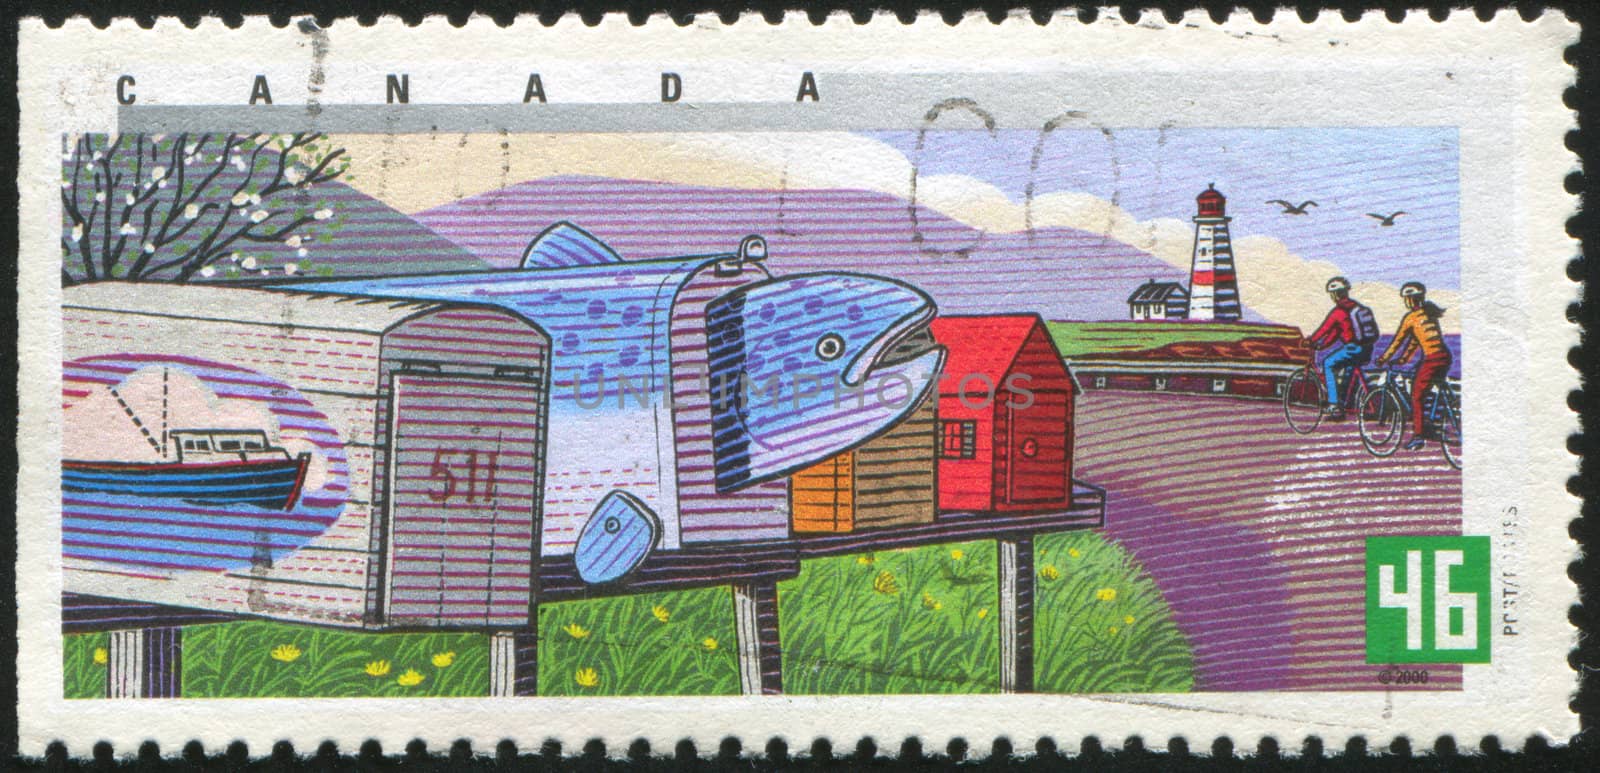 CANADA - CIRCA 2000: stamp printed by Canada, shows Decorated Rural Mailboxes, Ship, fish, house designs,  circa 2000